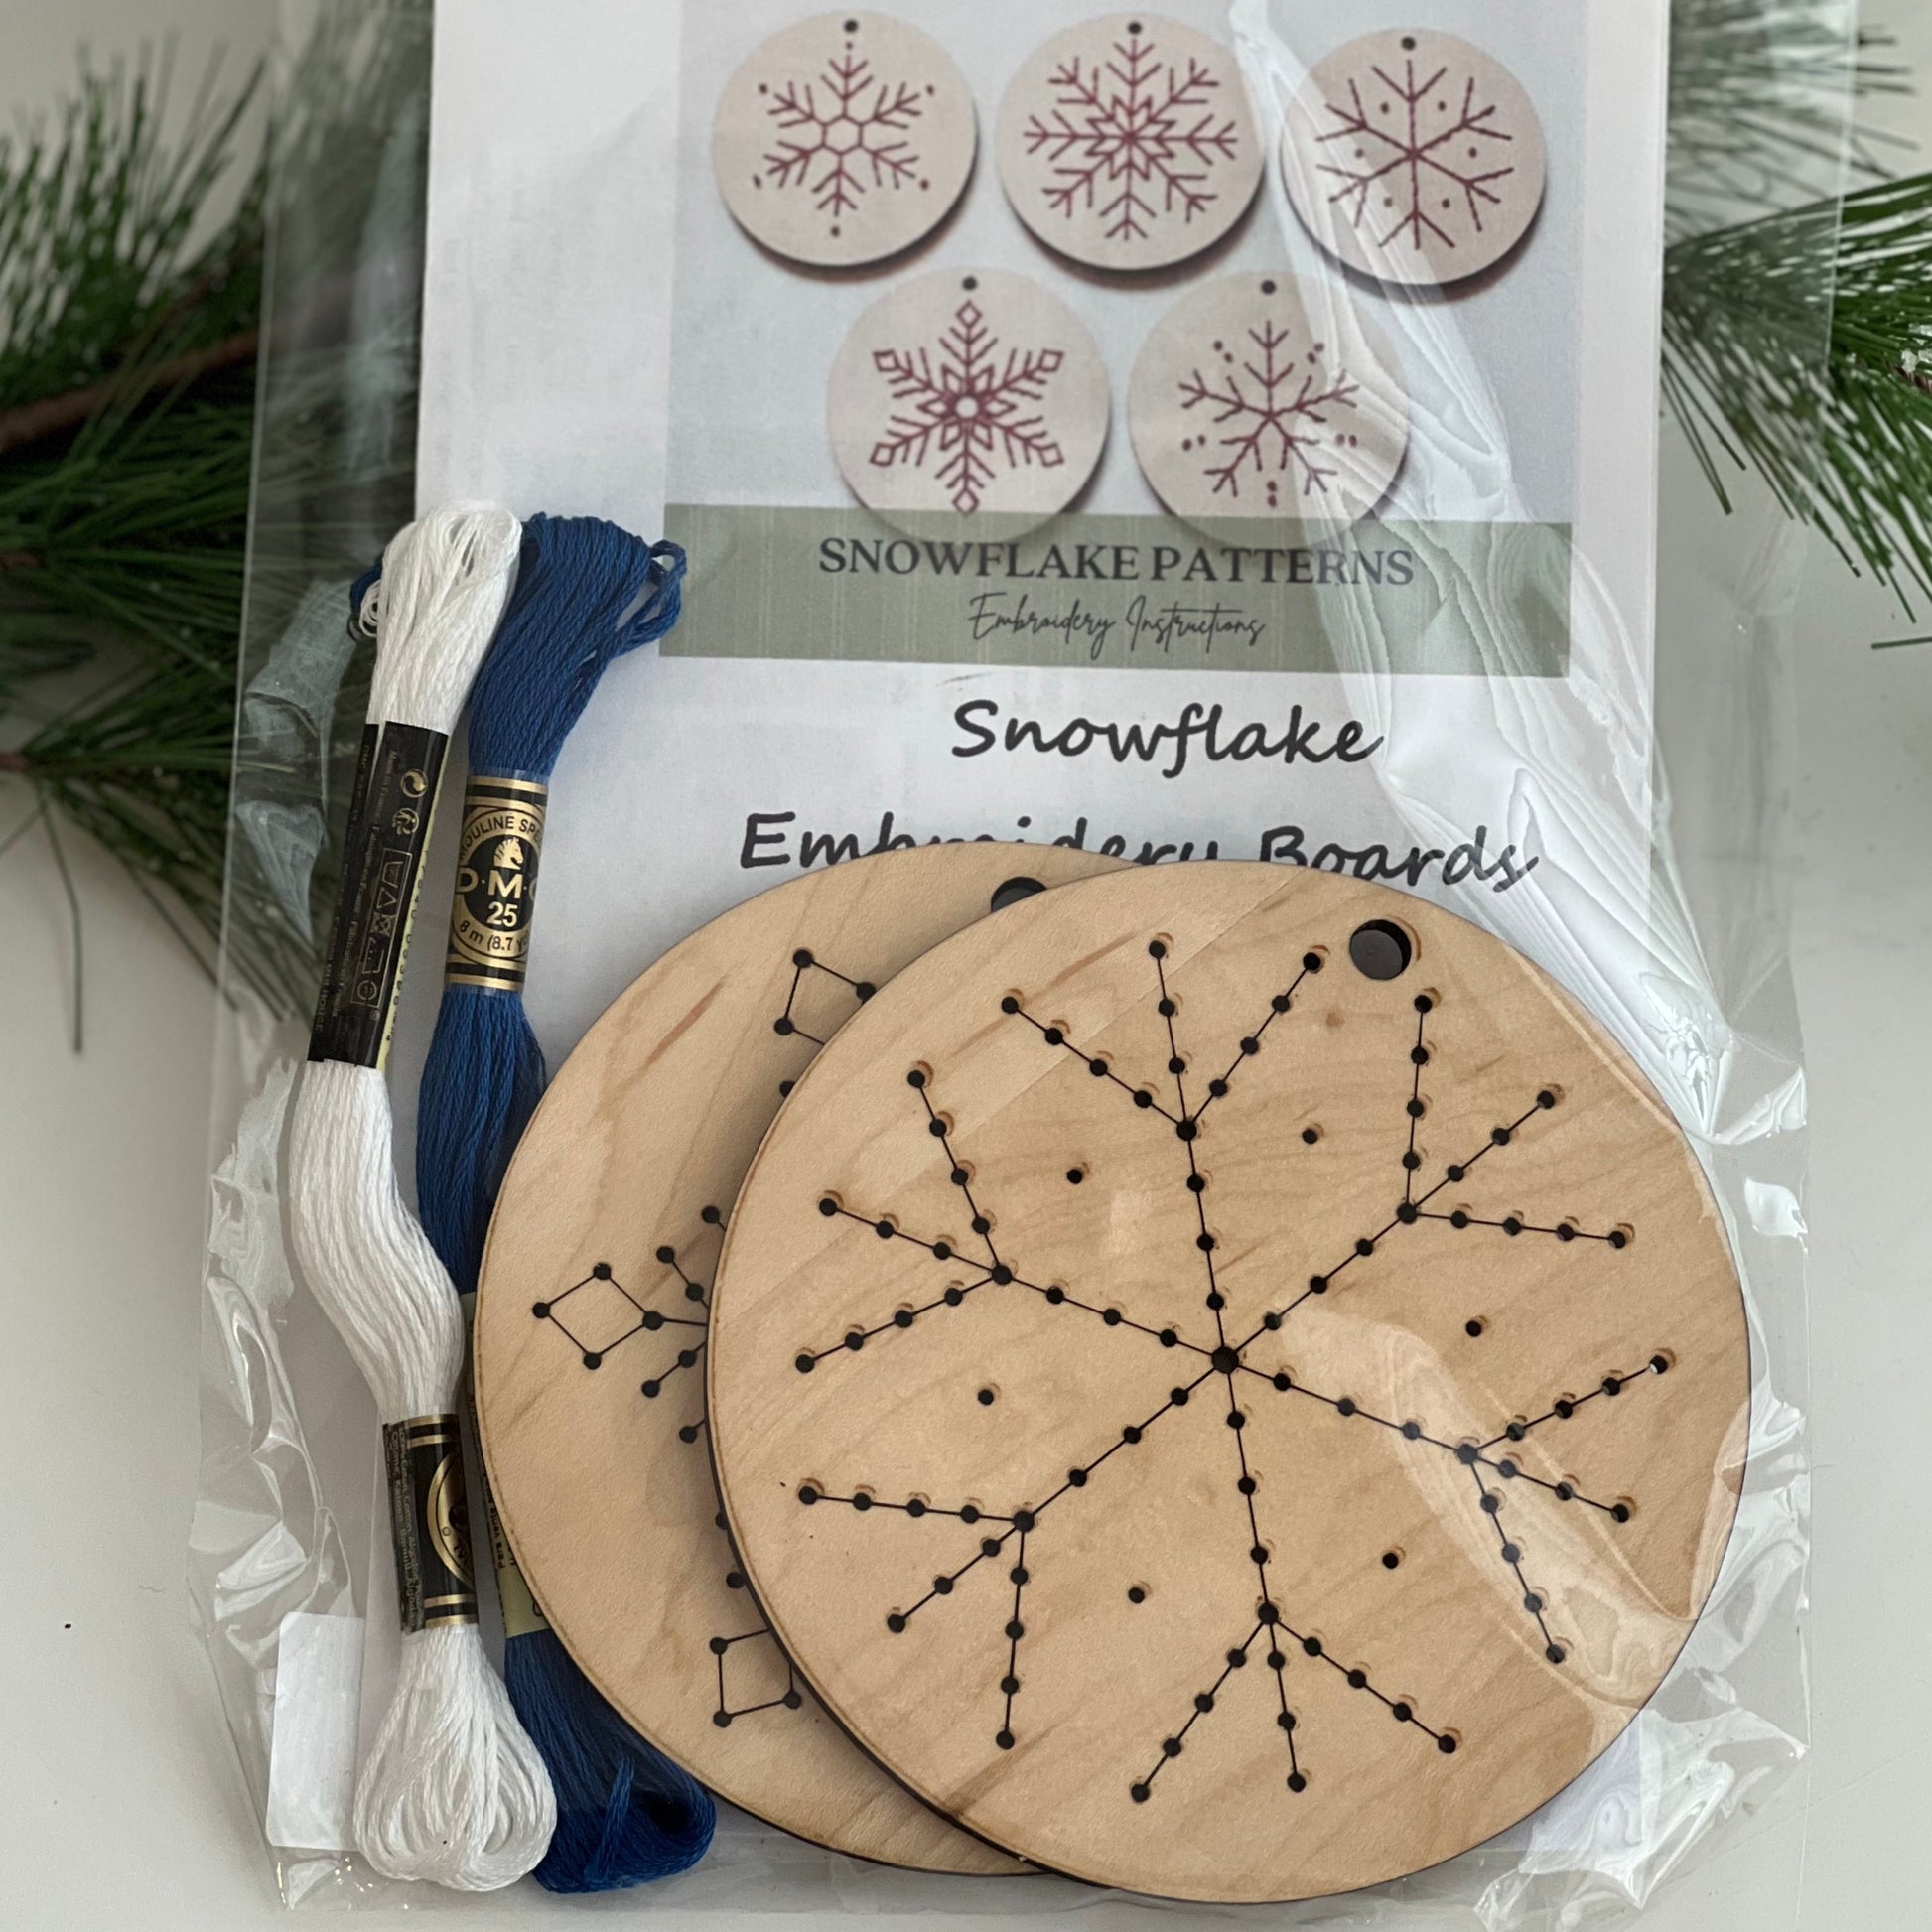 snowflake-embroidery-boards